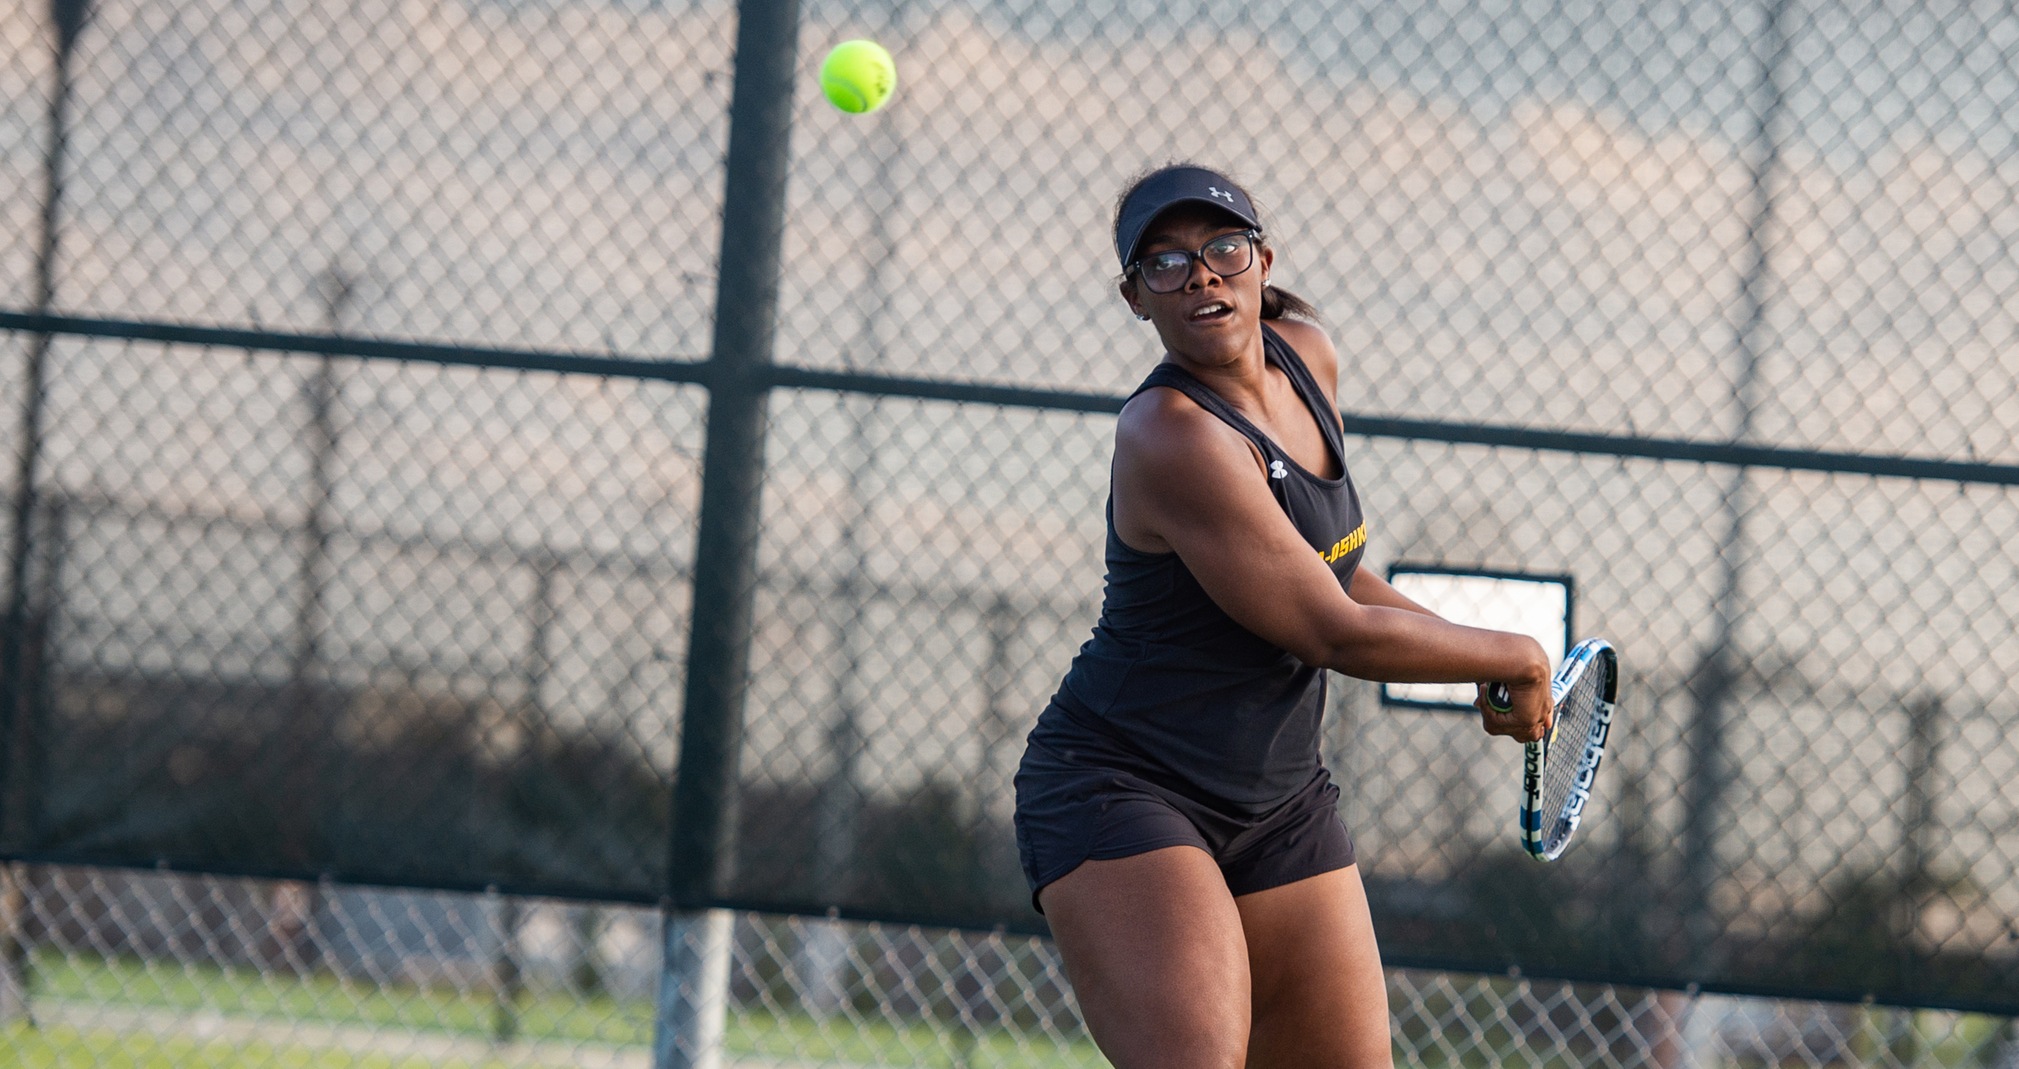 Michelle Spicer was involved in both UW-Oshkosh wins (No. 5 singles & No. 2 doubles) against George Fox University.